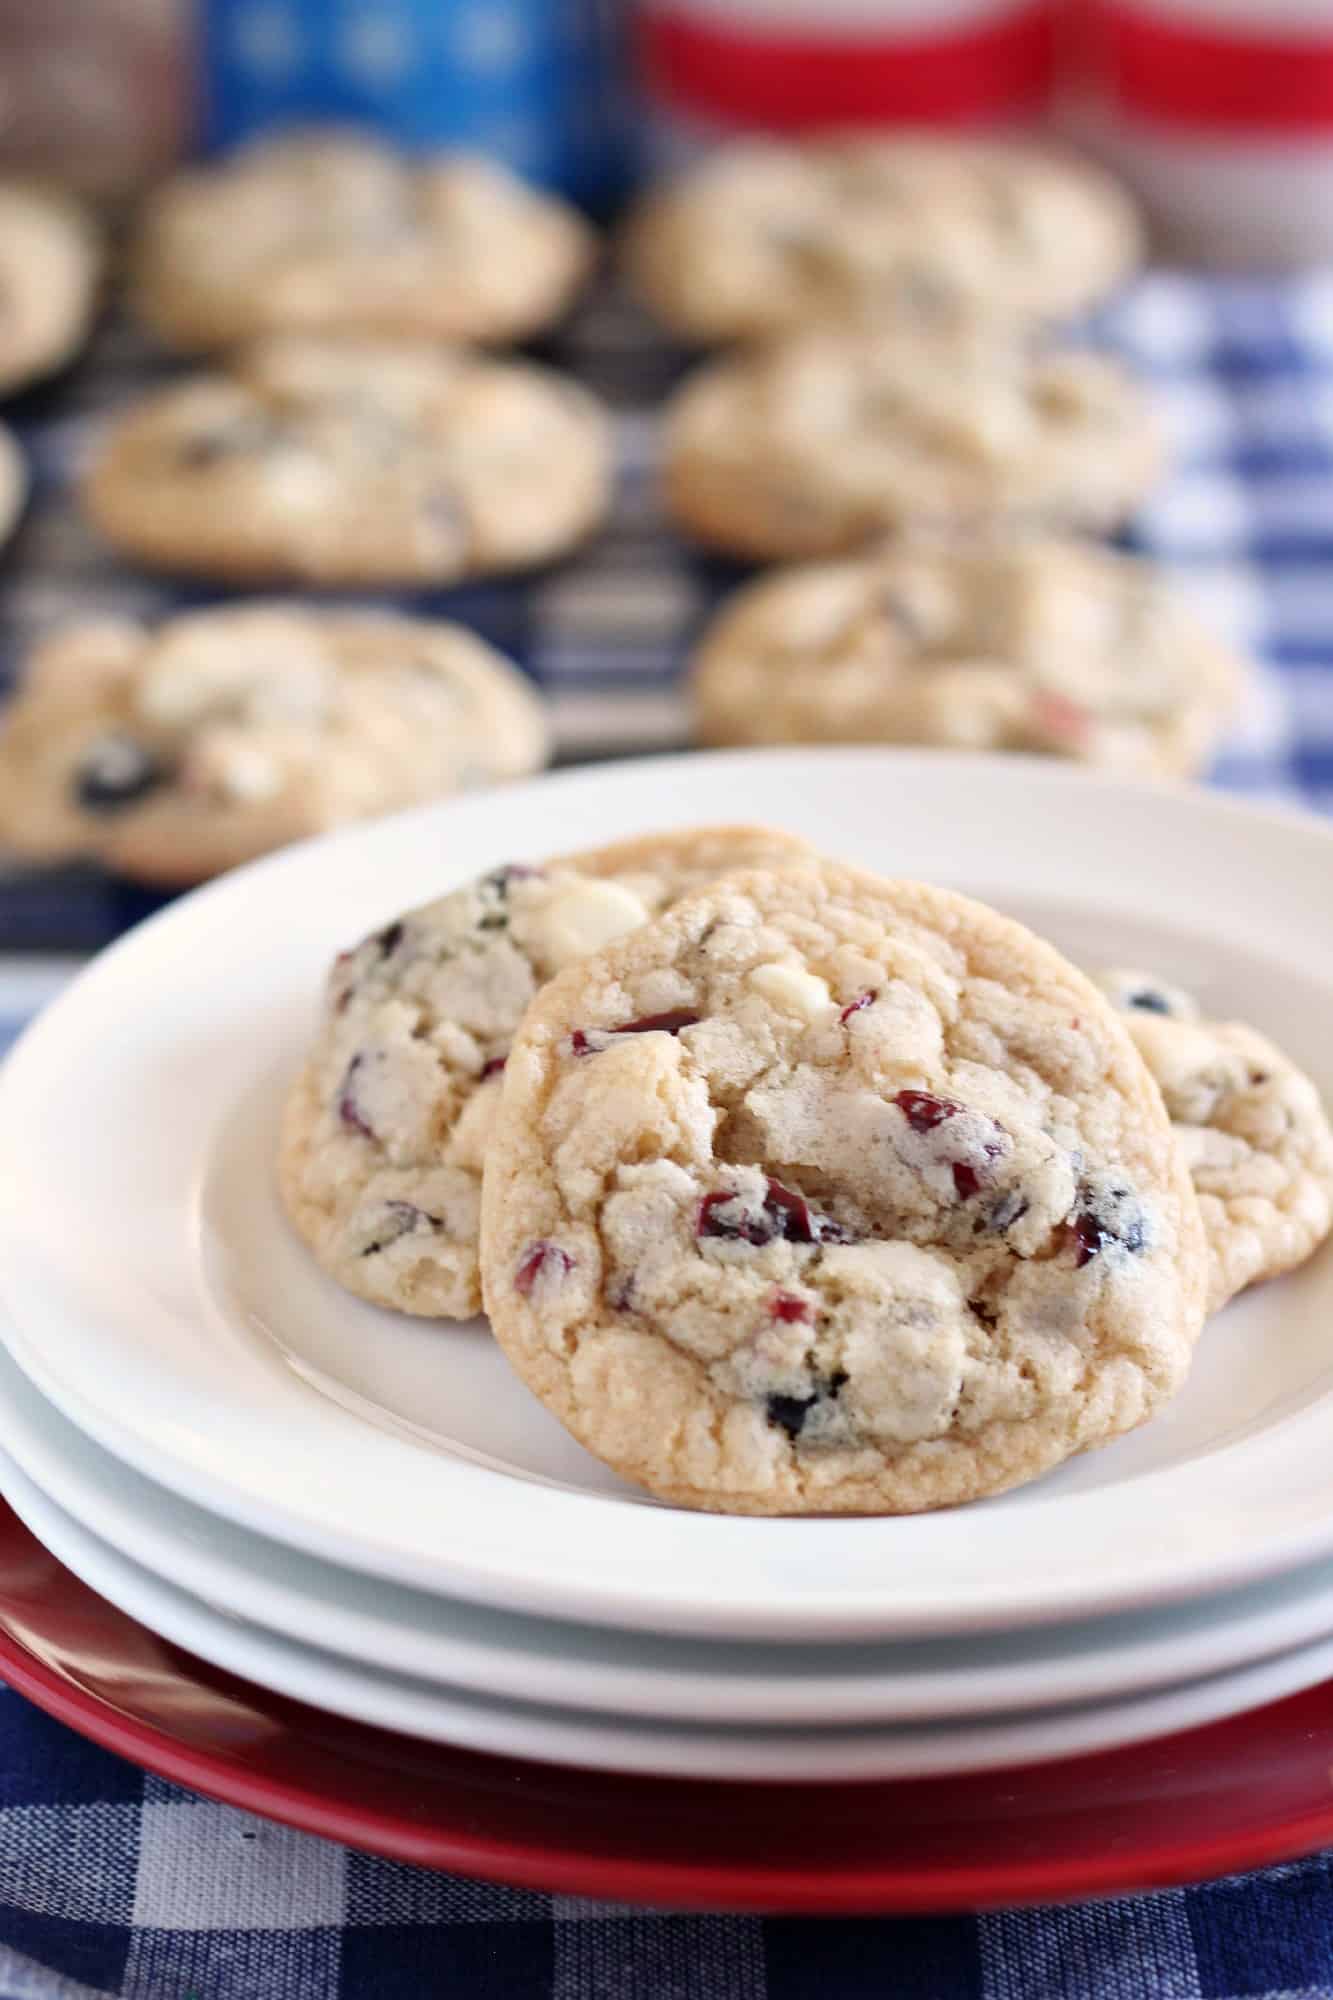 Red white and blue cookie with dried berries and white chocolate